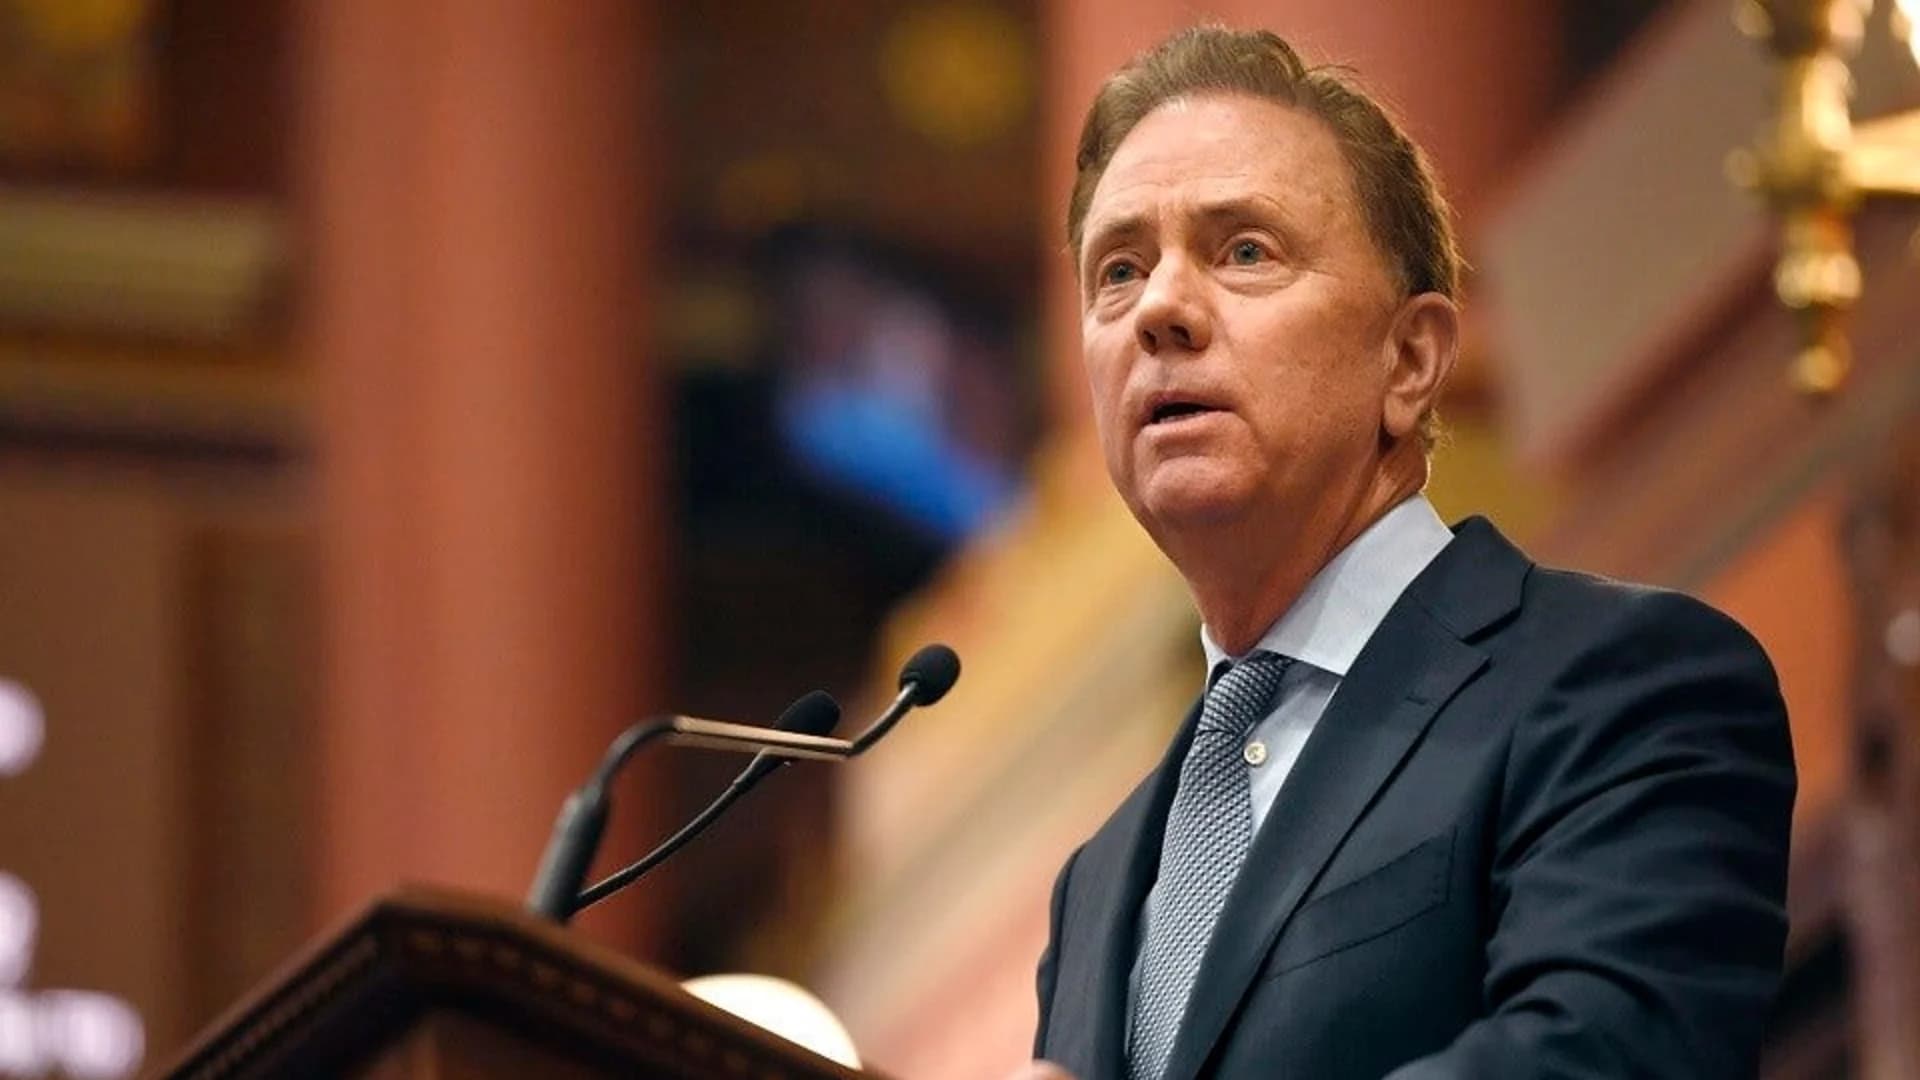 Gov. Lamont requests more COVID-19 testing kits from CDC